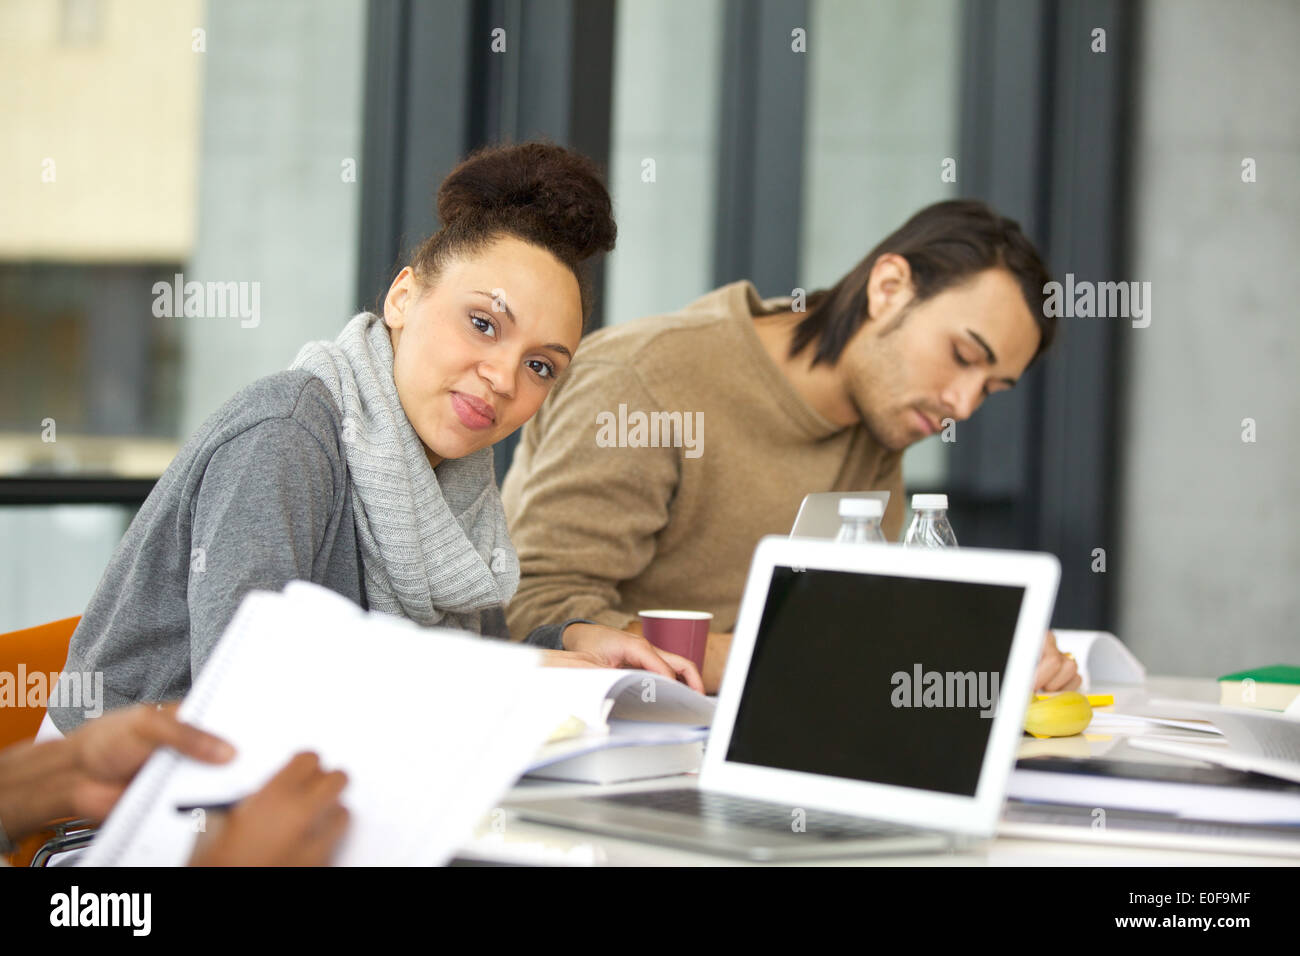 Confident young woman sitting at table looking at camera. Students studying with books and laptop in library. Stock Photo